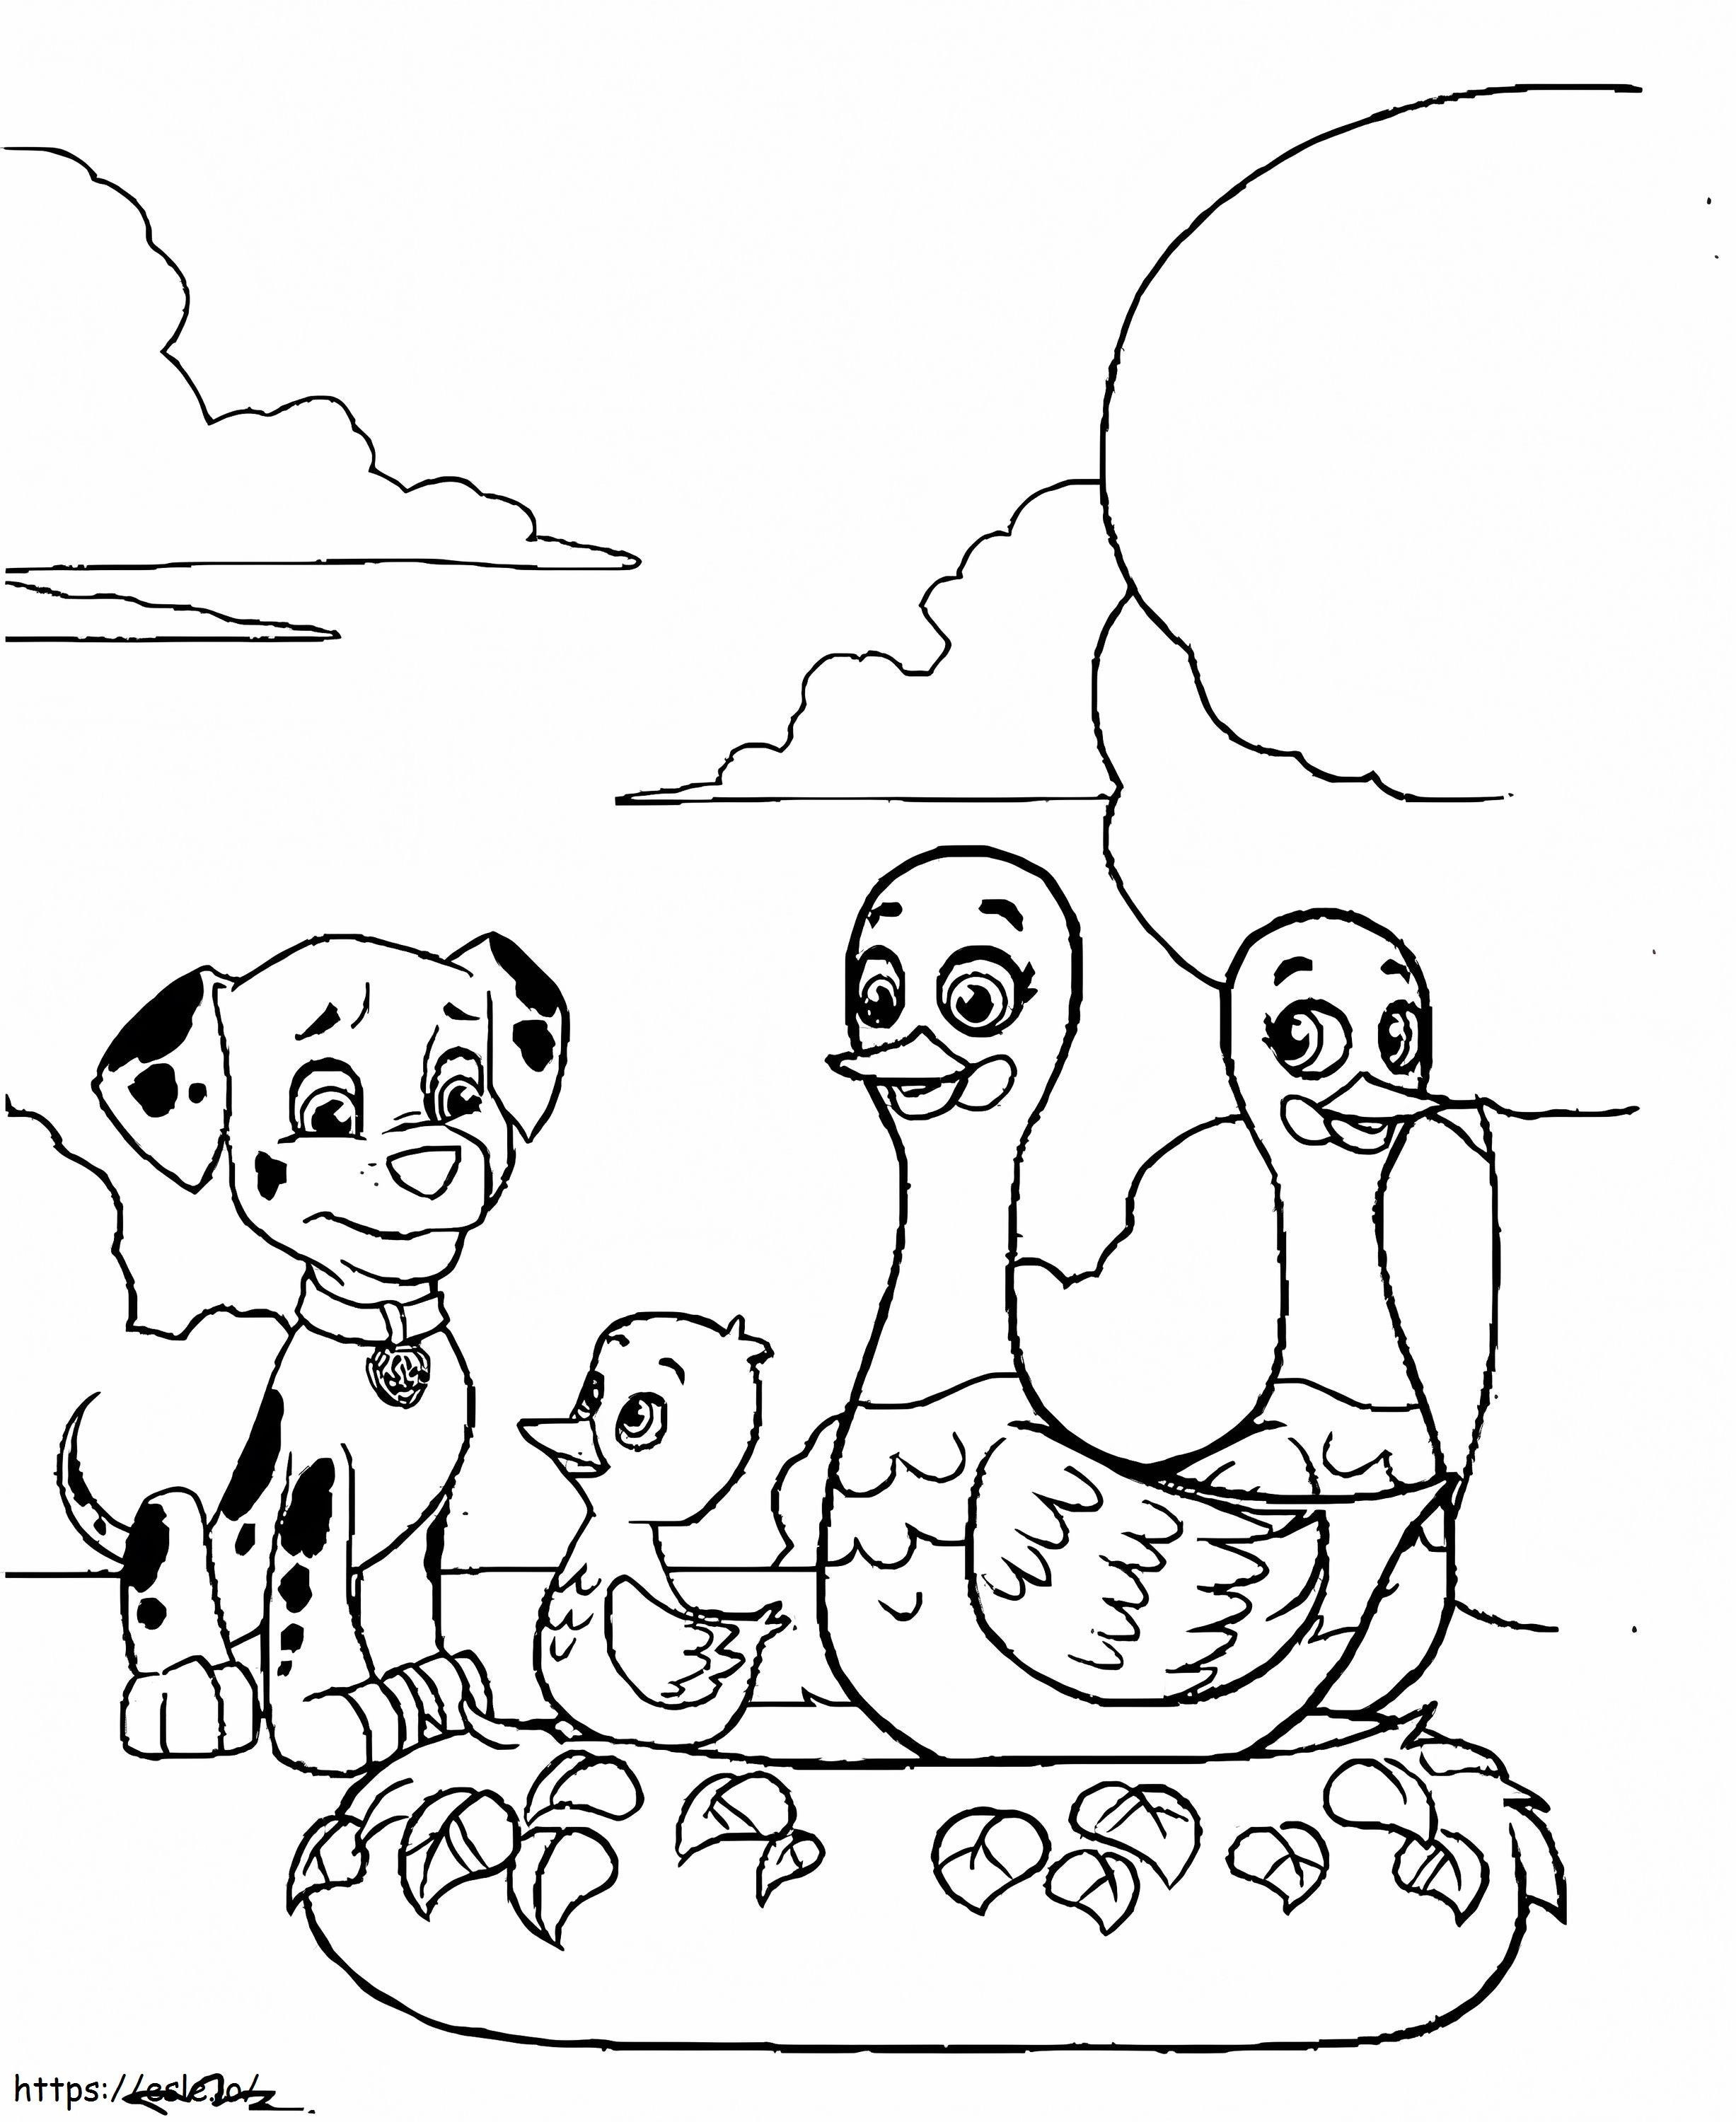 Marshall Paw Patrol And Duck coloring page